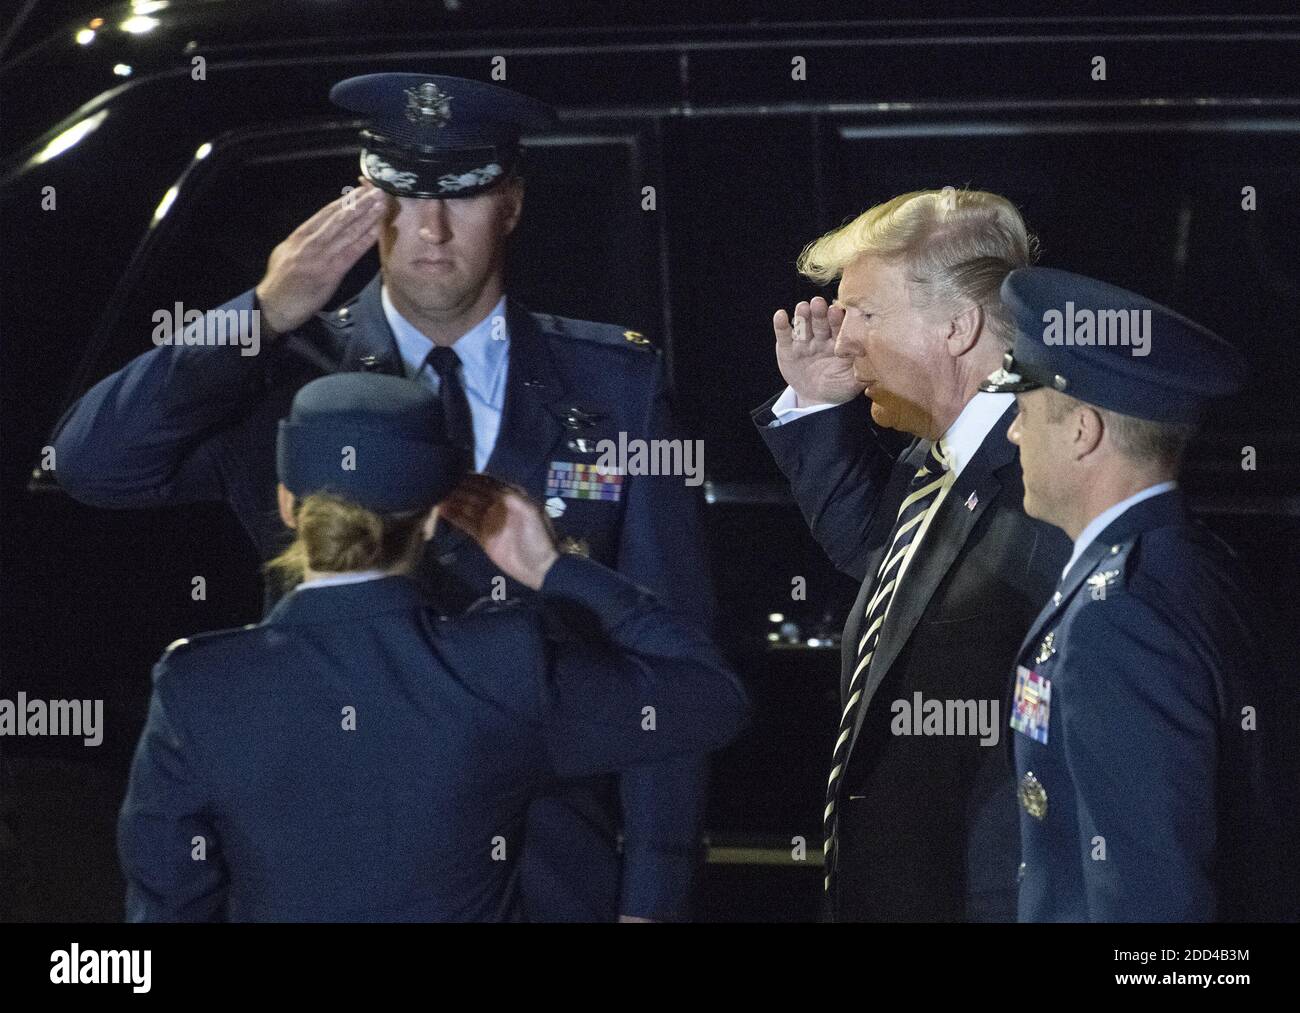 United States President Donald J. Trump exchanges salutes with officers as he prepares to welcome Kim Dong Chul, Kim Hak Song and Tony Kim back to the US at Joint Base Andrews in Maryland on Thursday, May 10, 2018. The three men were imprisoned in North Korea for periods ranging from one and two years. They were released to US Secretary of State Mike Pompeo as a good-will gesture in the lead-up to the talks between President Trump and North Korean leader Kim Jong Un. Photo by Ron Sachs/CNP/ABACAPRESS.COM Stock Photo